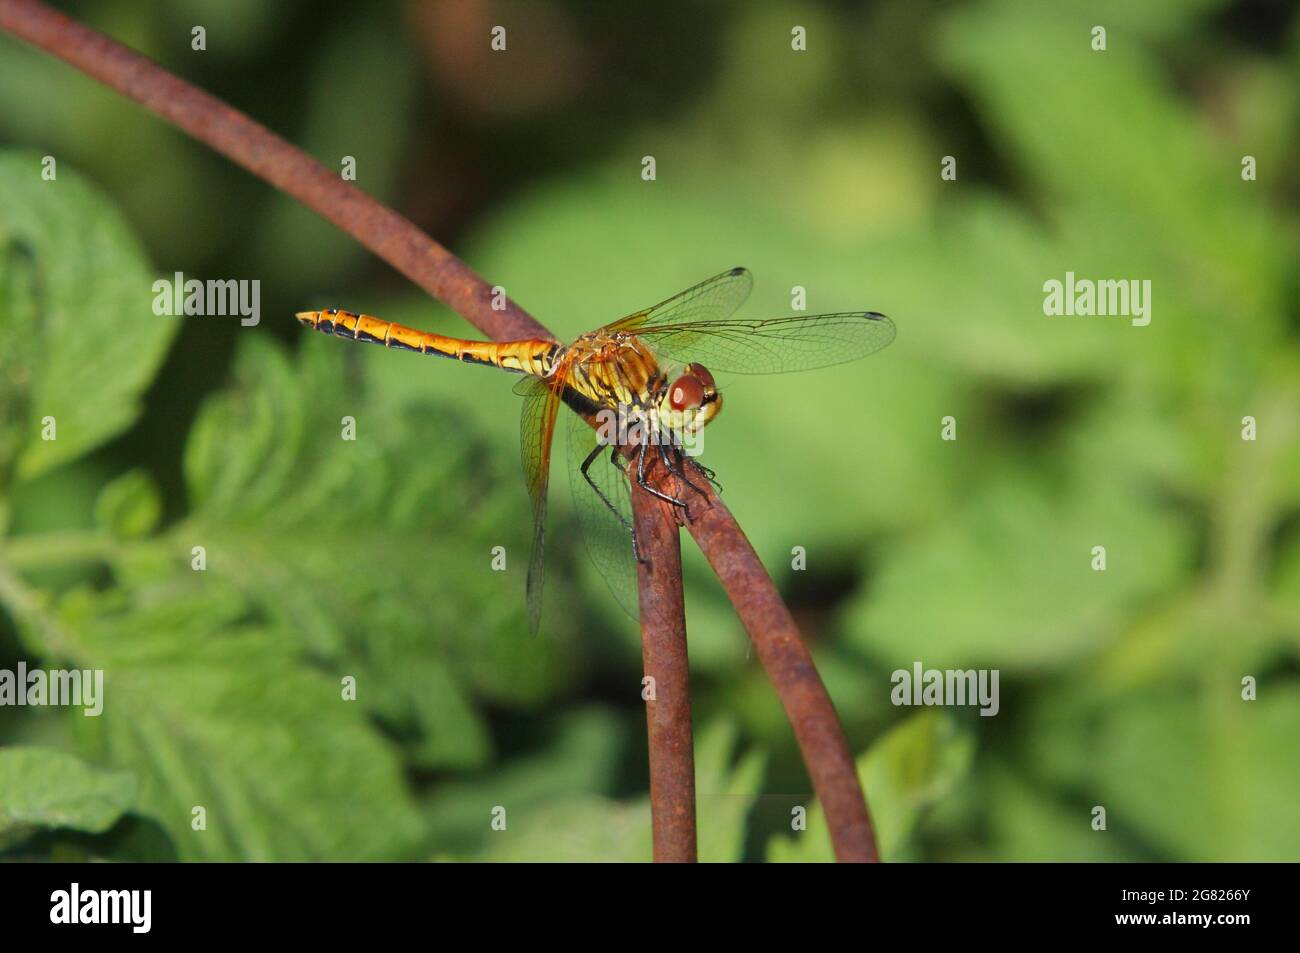 dragonfly perched on rusty plant cage close-up Stock Photo